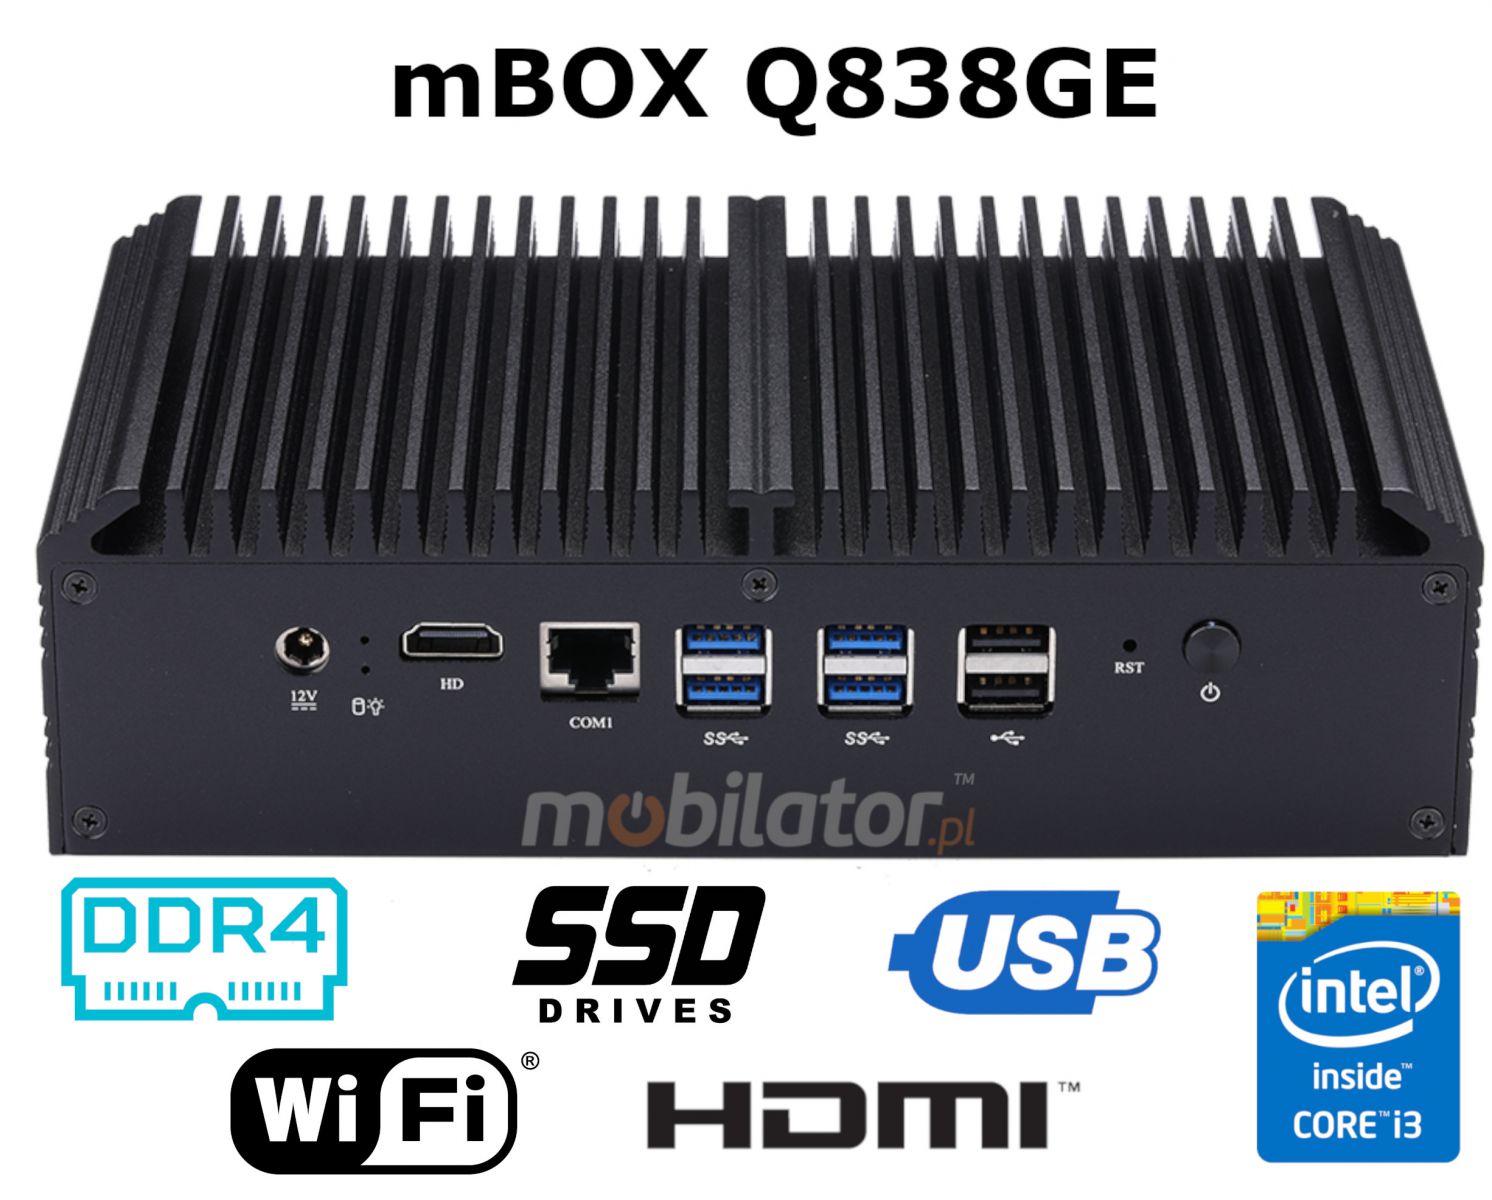 mBOX Q838GE v. 2 with higher SSD capacity and 4GB RAM